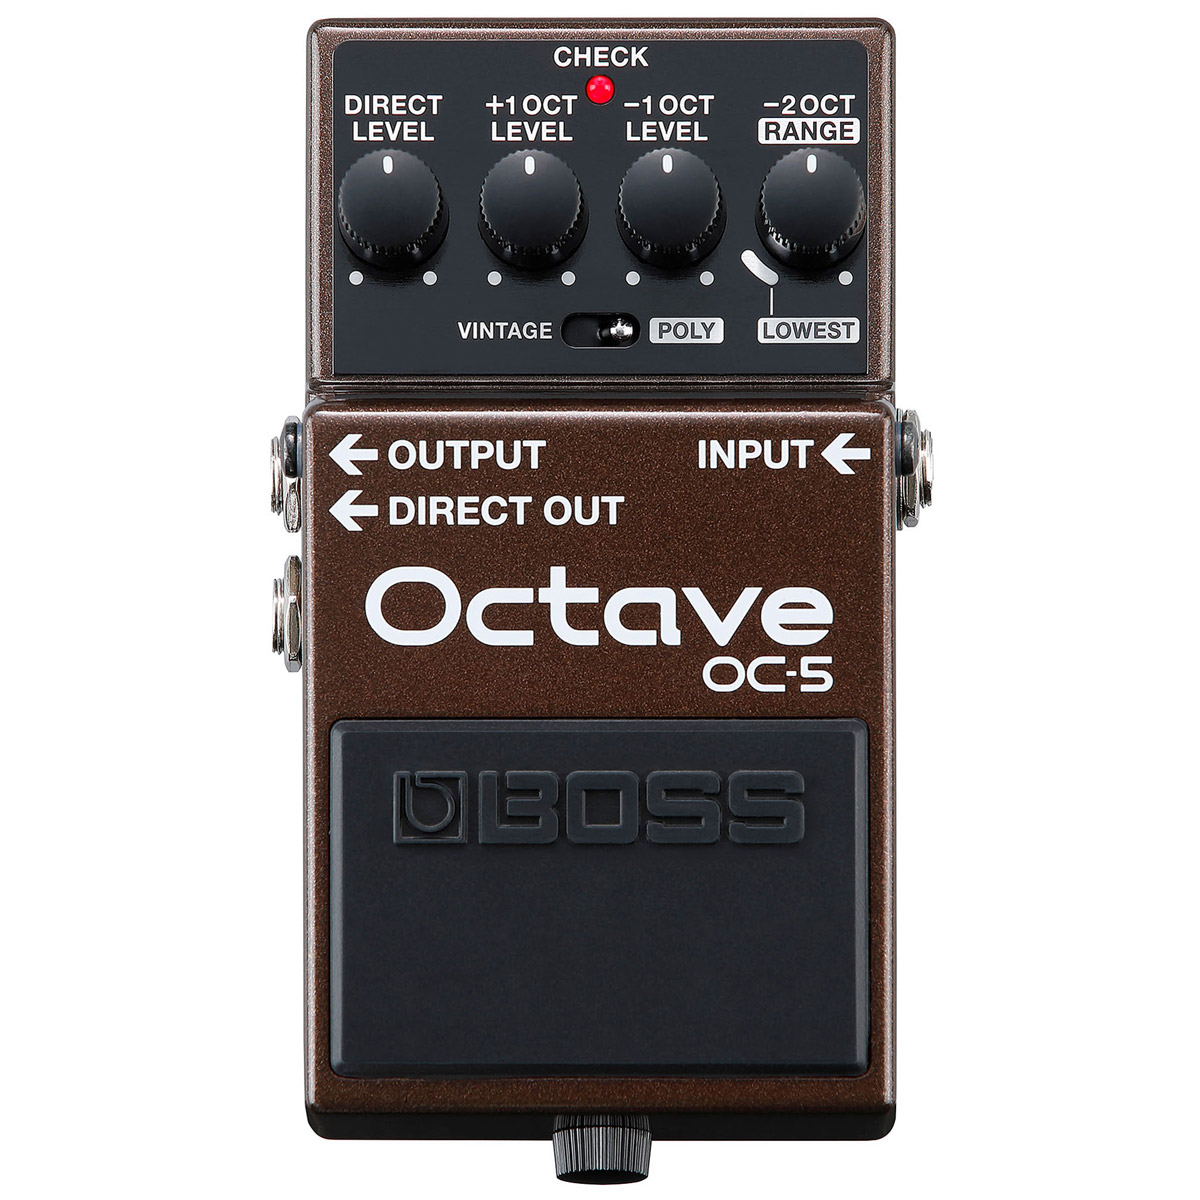 BOSS OC-5 Octave Review and Buffered Output